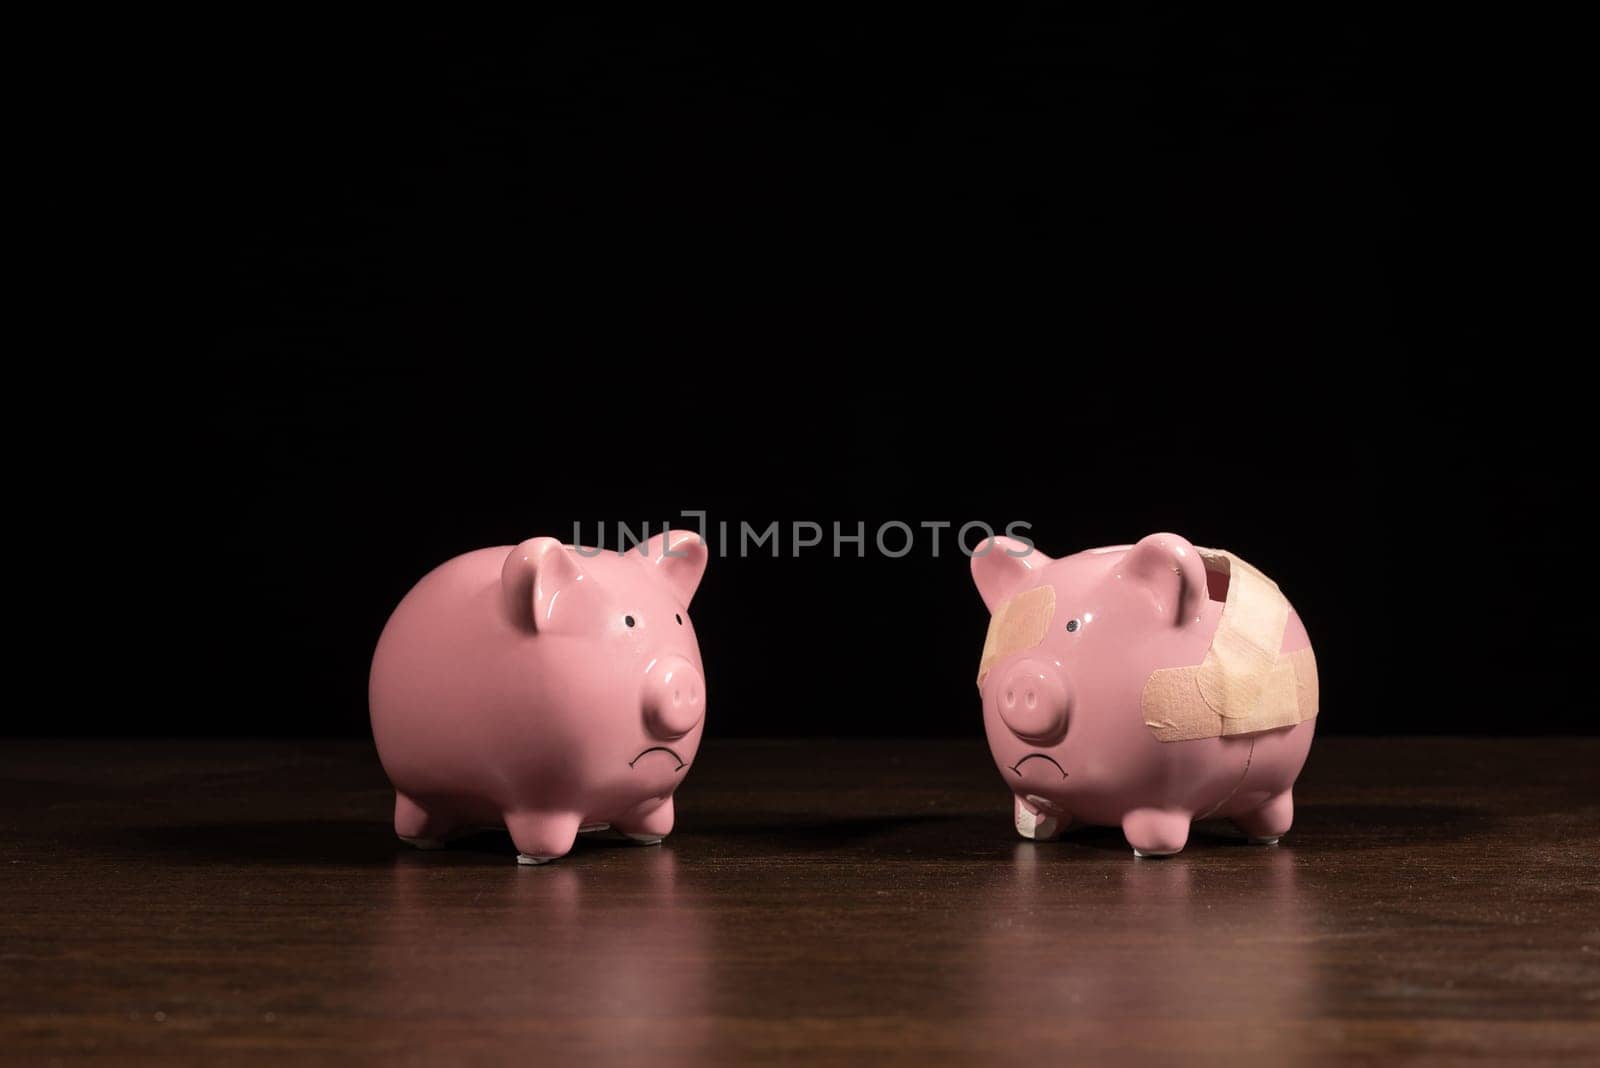 New And Broken piggy bank with band aid bandage or plaster finance background concept for economic recession or bankruptcy